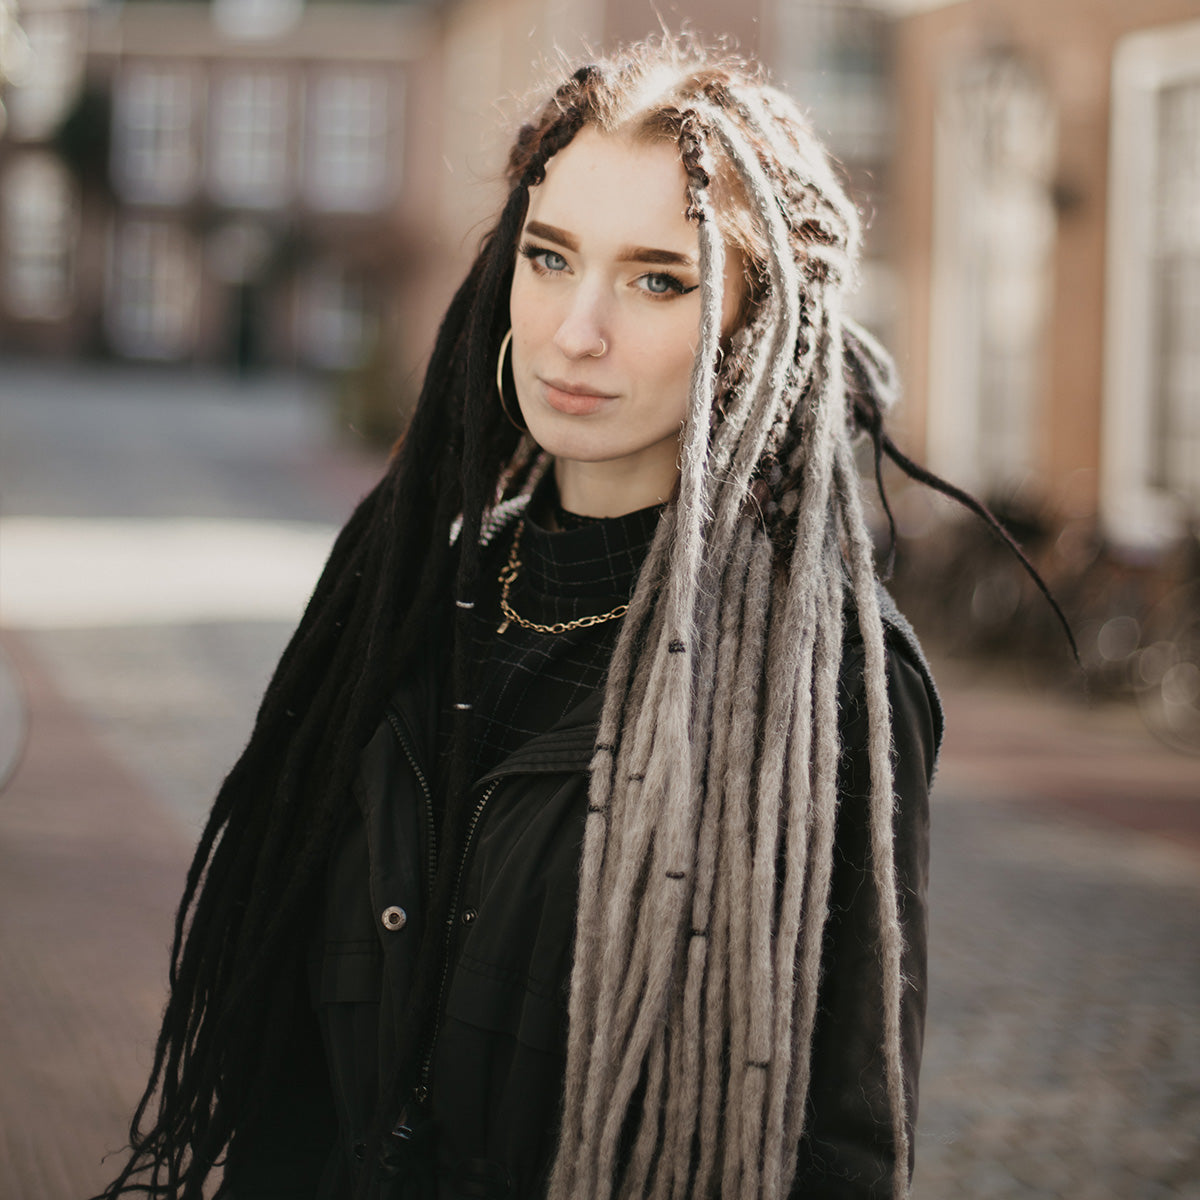 30 Dreadlock Styles That Are Cooler Than Any Other Hairstyle in 2023 |  Zikoko!